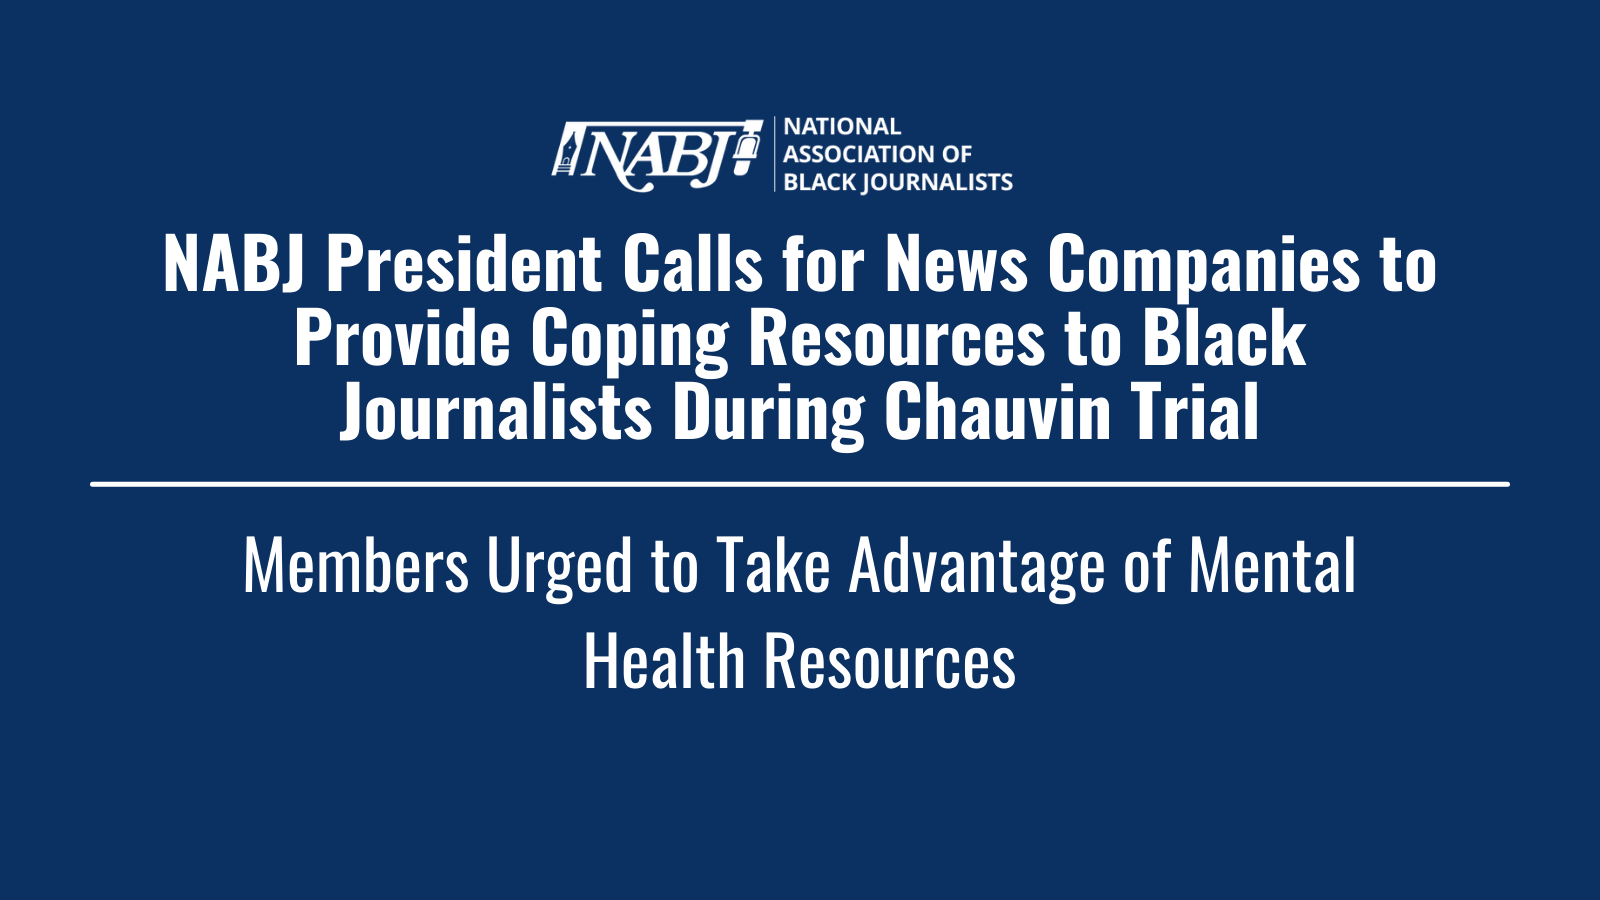 NABJ President Calls on Companies to Provide Coping Support